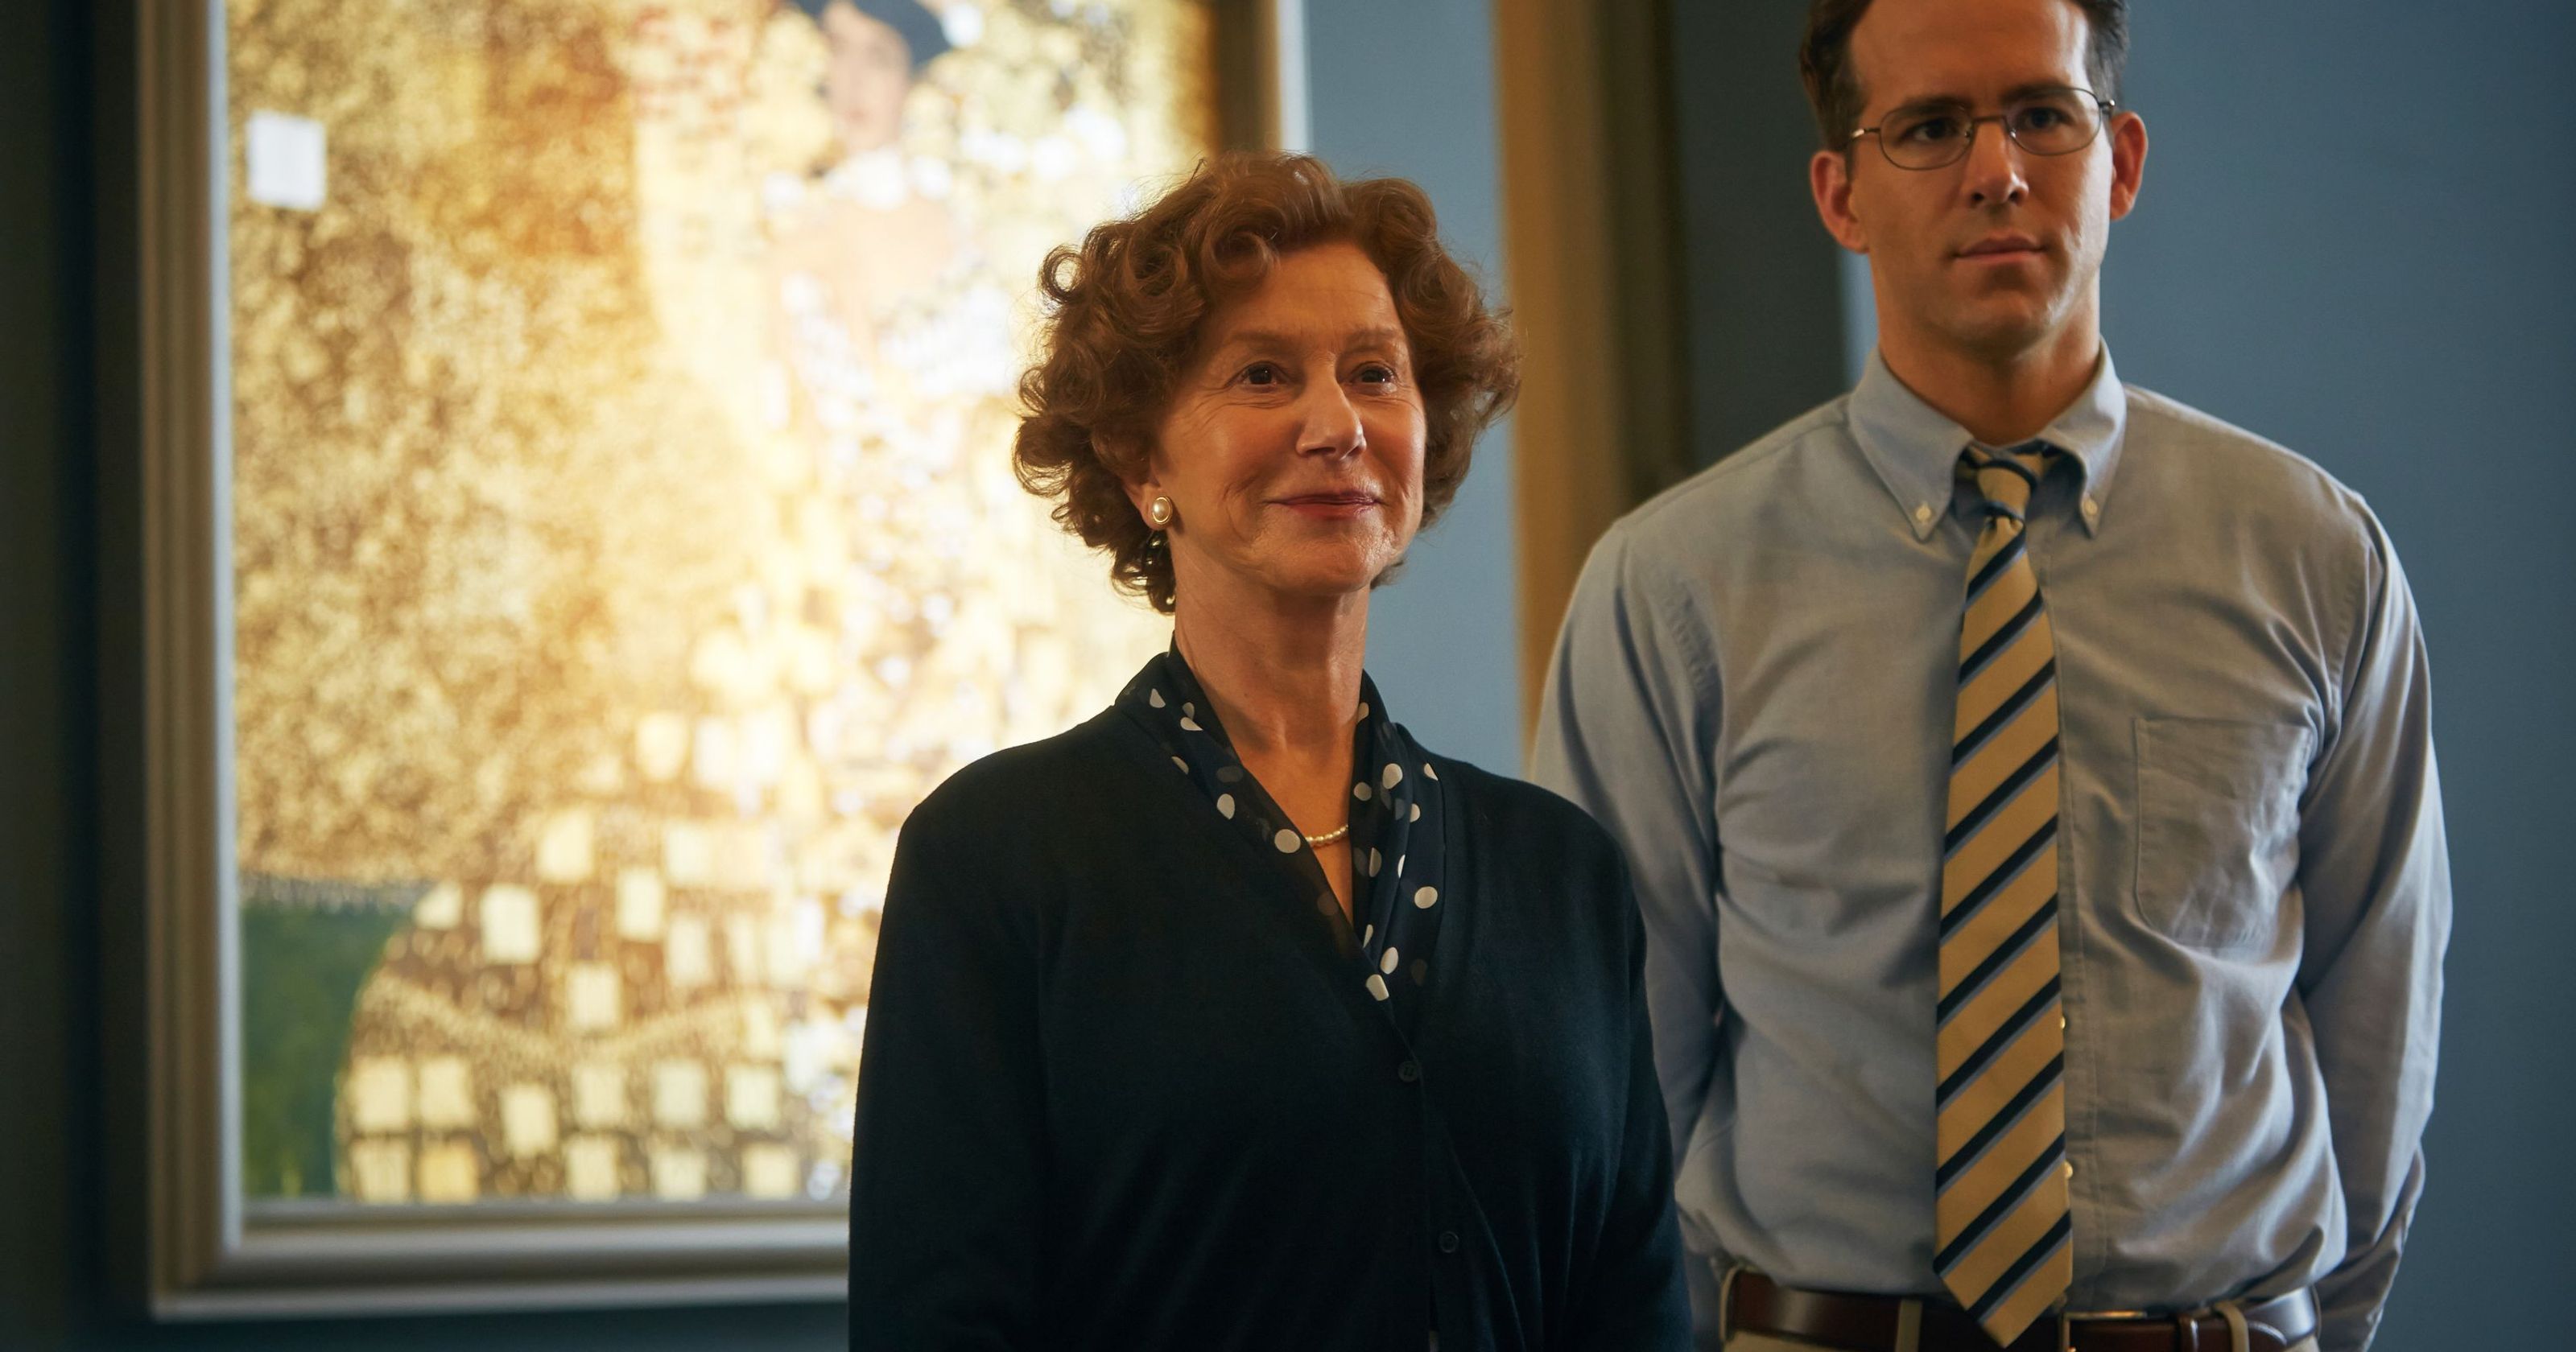 Woman In Gold